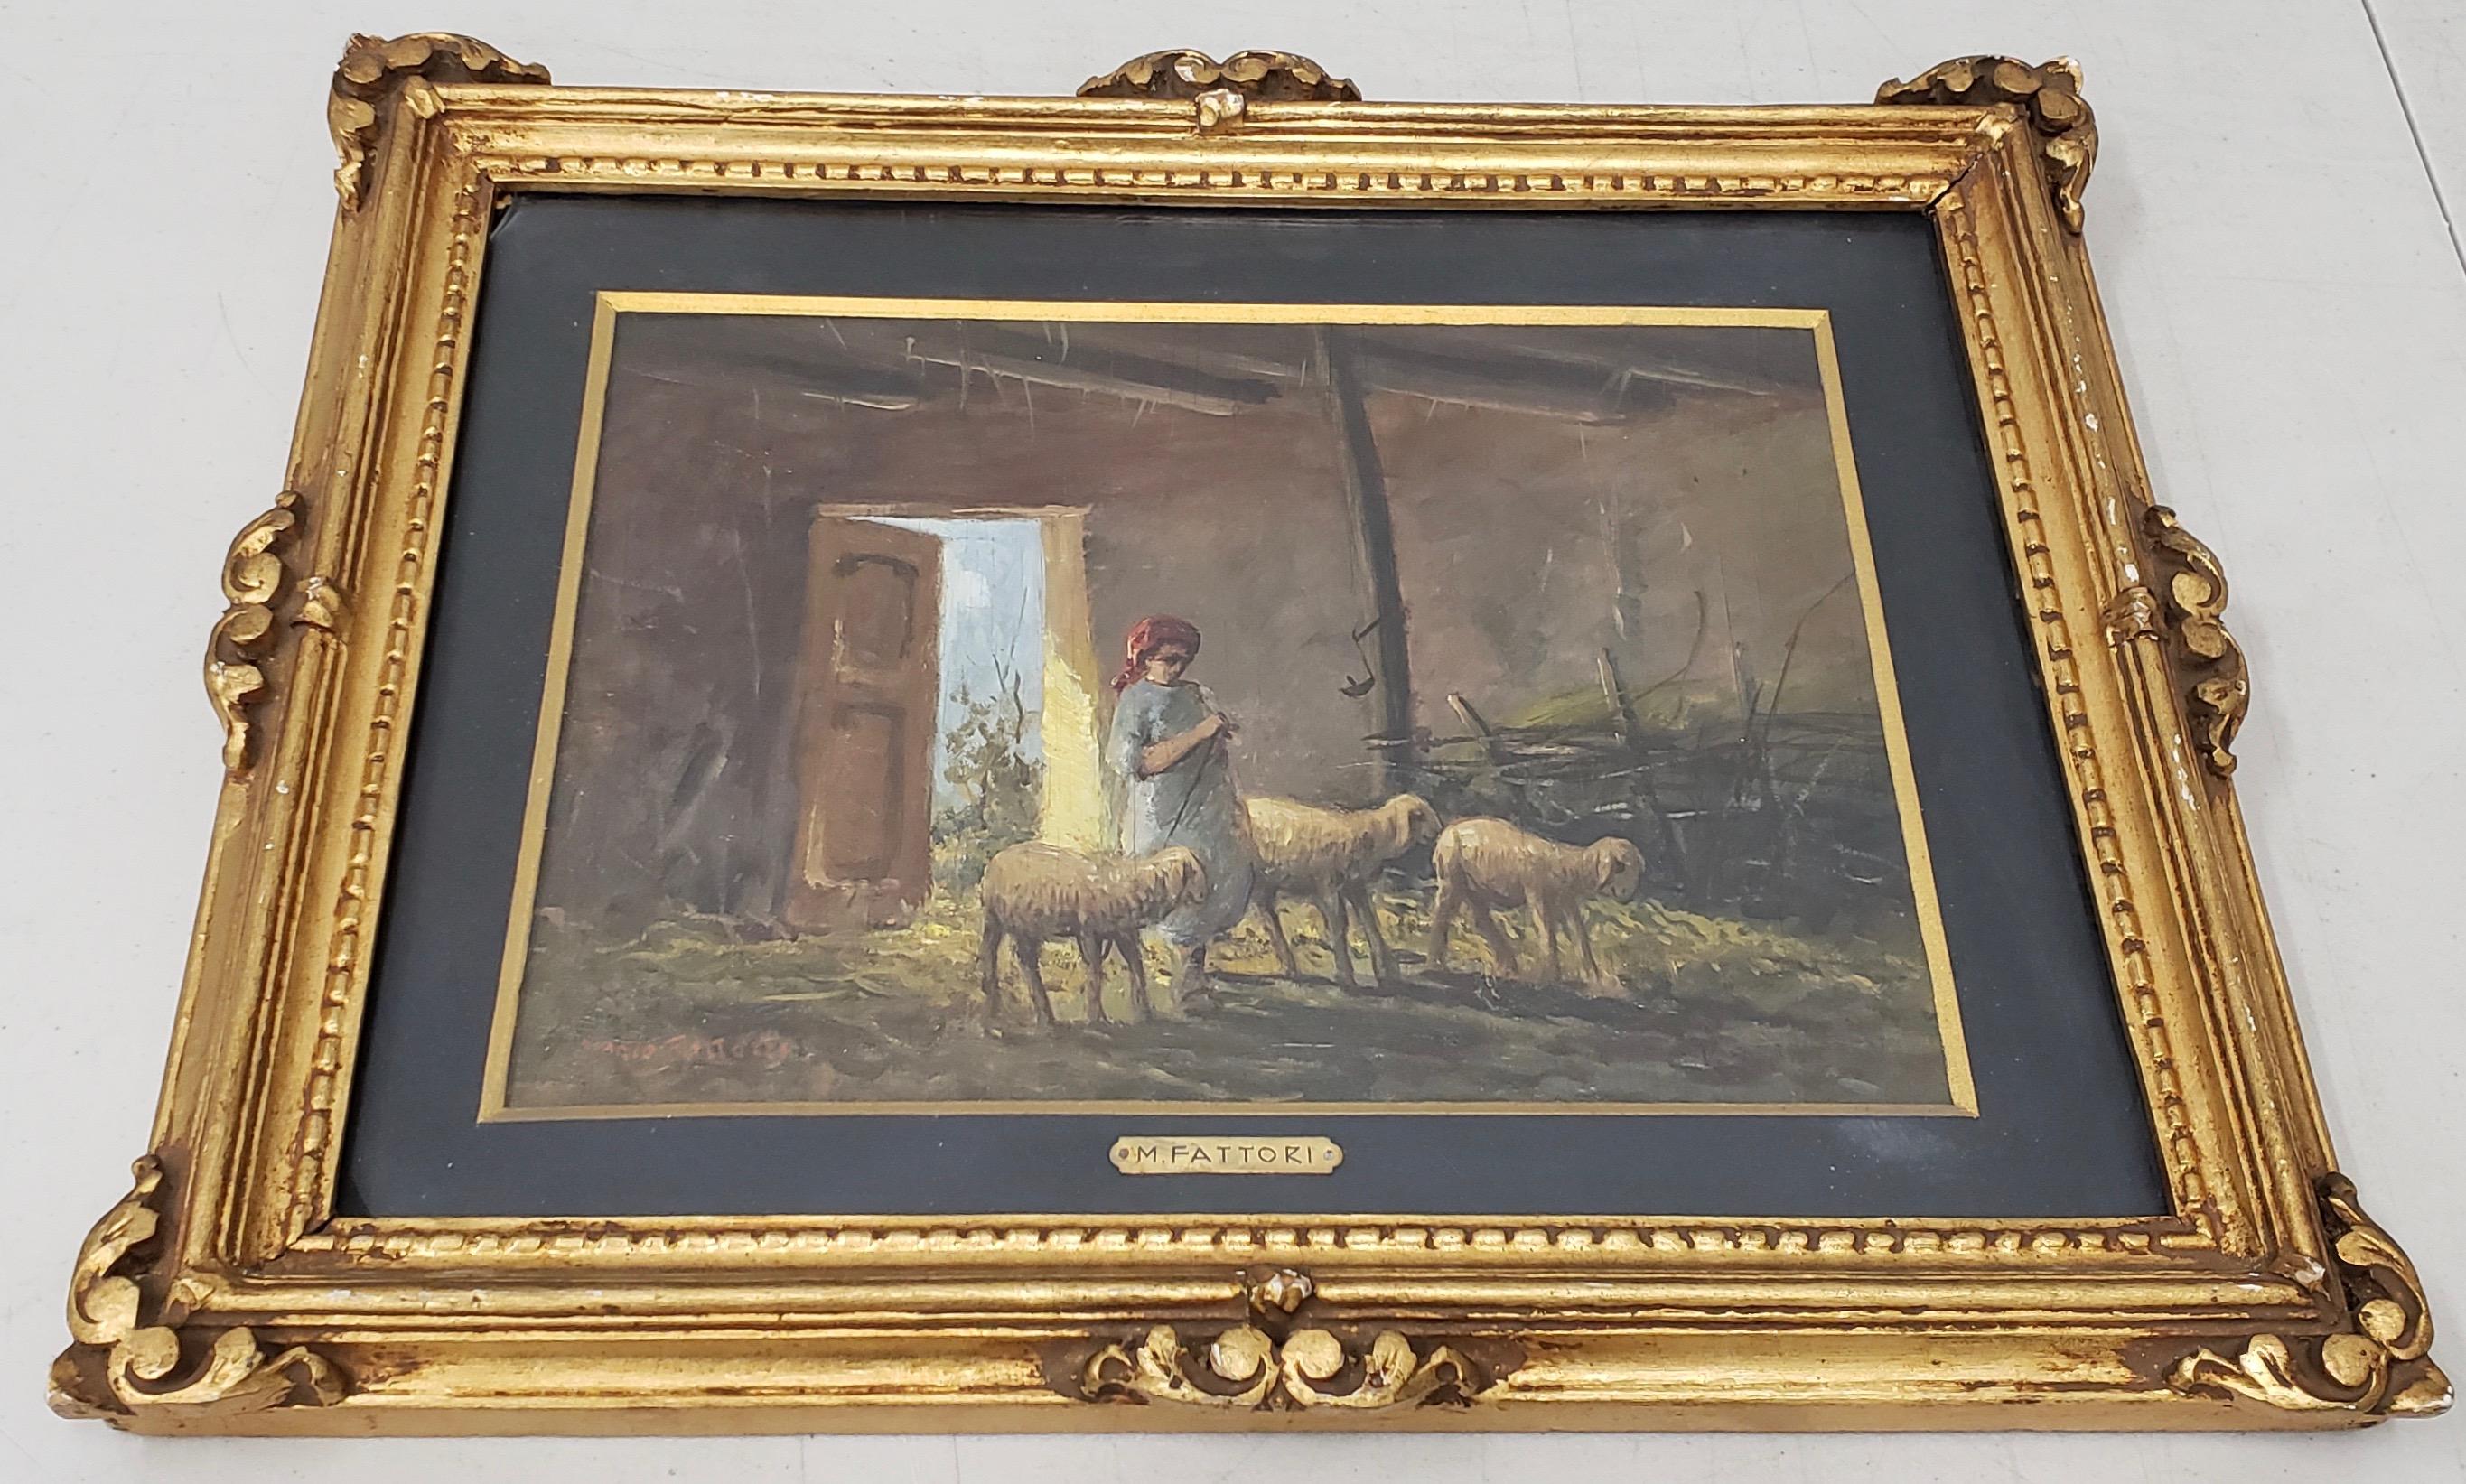 Pair of early 20th century oil paintings by Mario Fattori, circa 1920s

Wonderful pair of oil paintings. One shows a young woman standing in a barn interior with sheep, the other shows a young man reading by the fire while his mother sews.

The